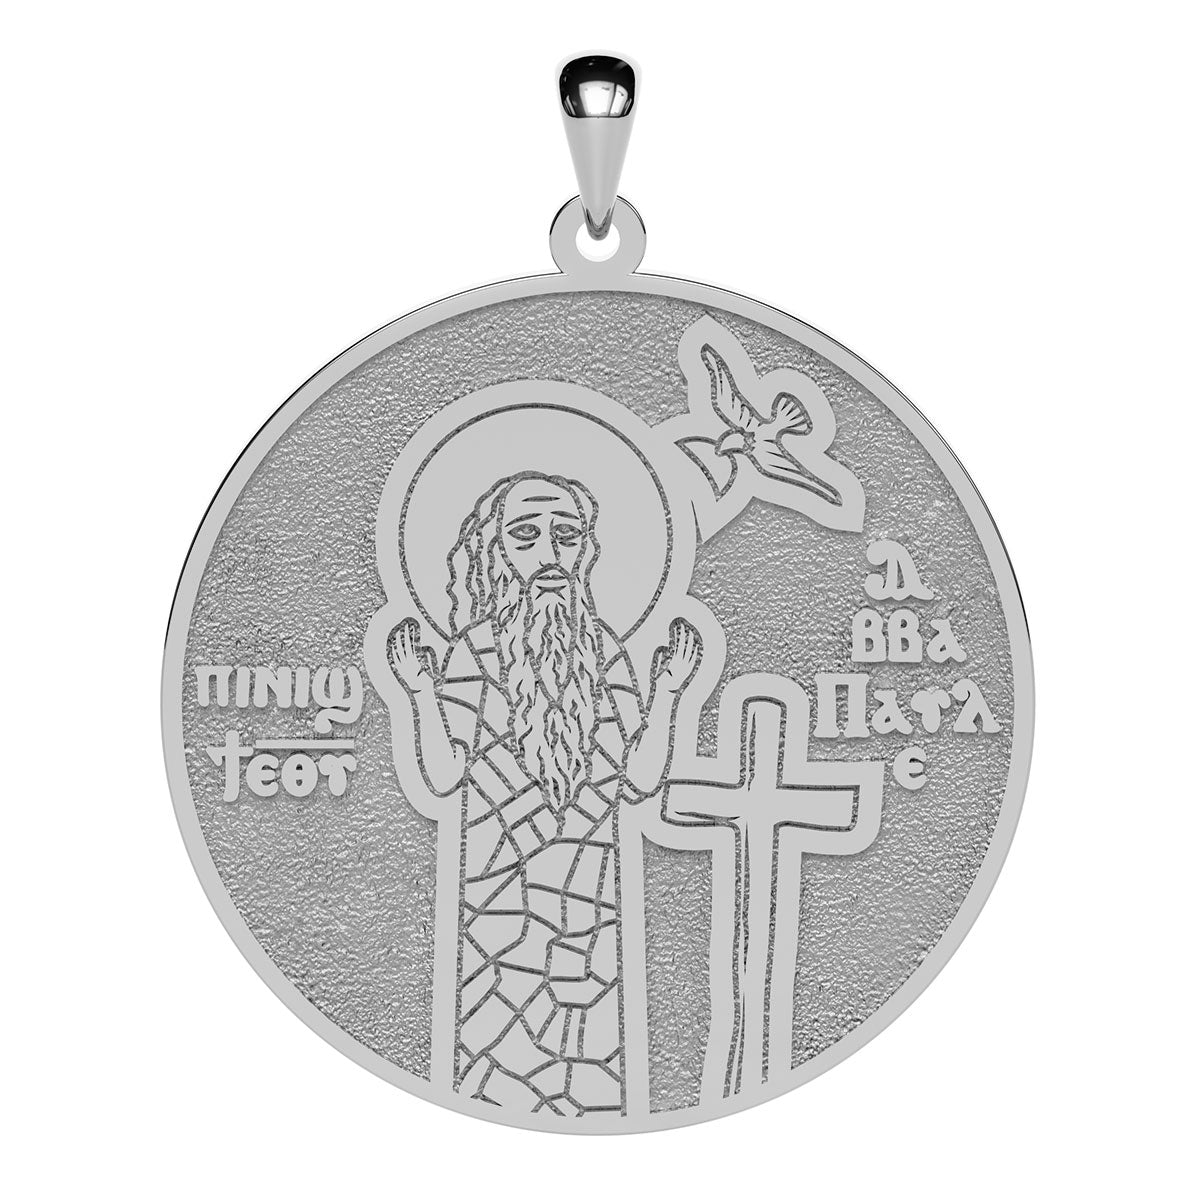 Saint Paul the First Hermit Coptic Orthodox Icon Round Medal